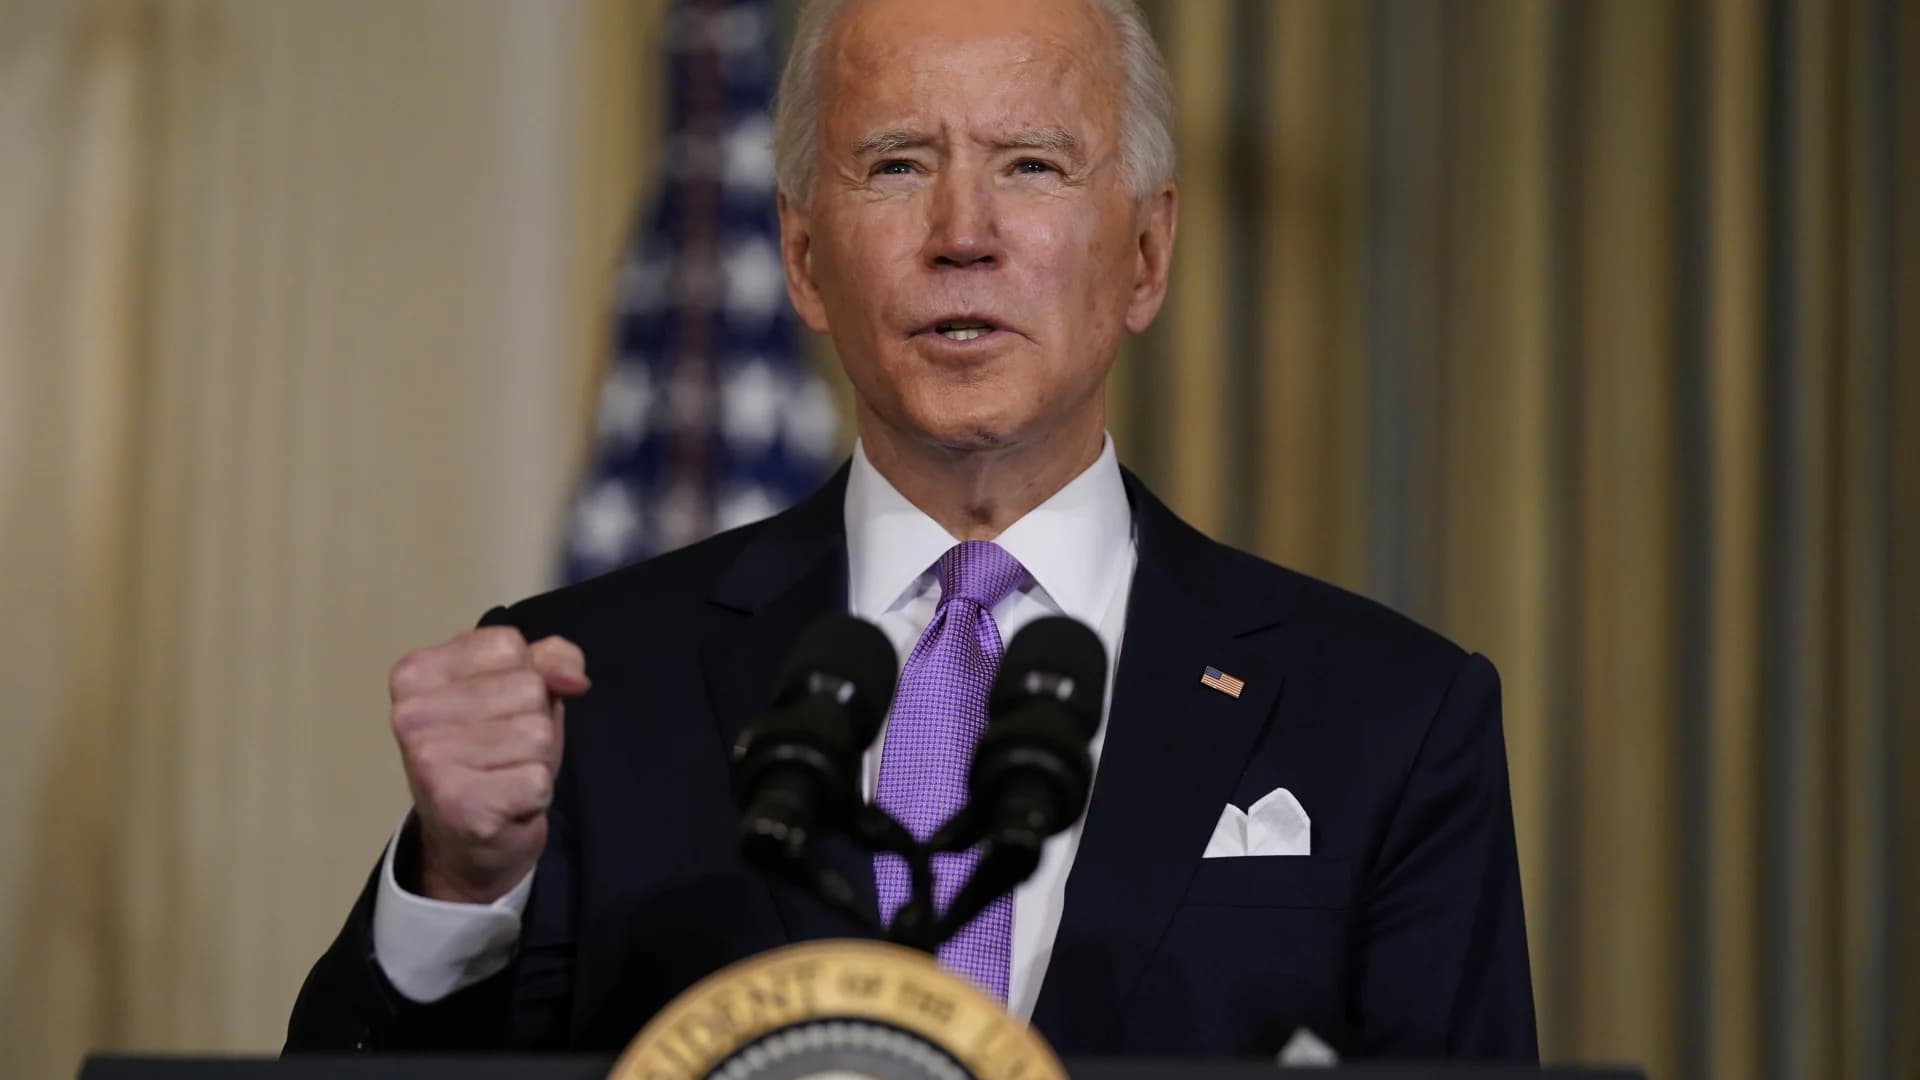 President Biden orders end of federally run private prisons